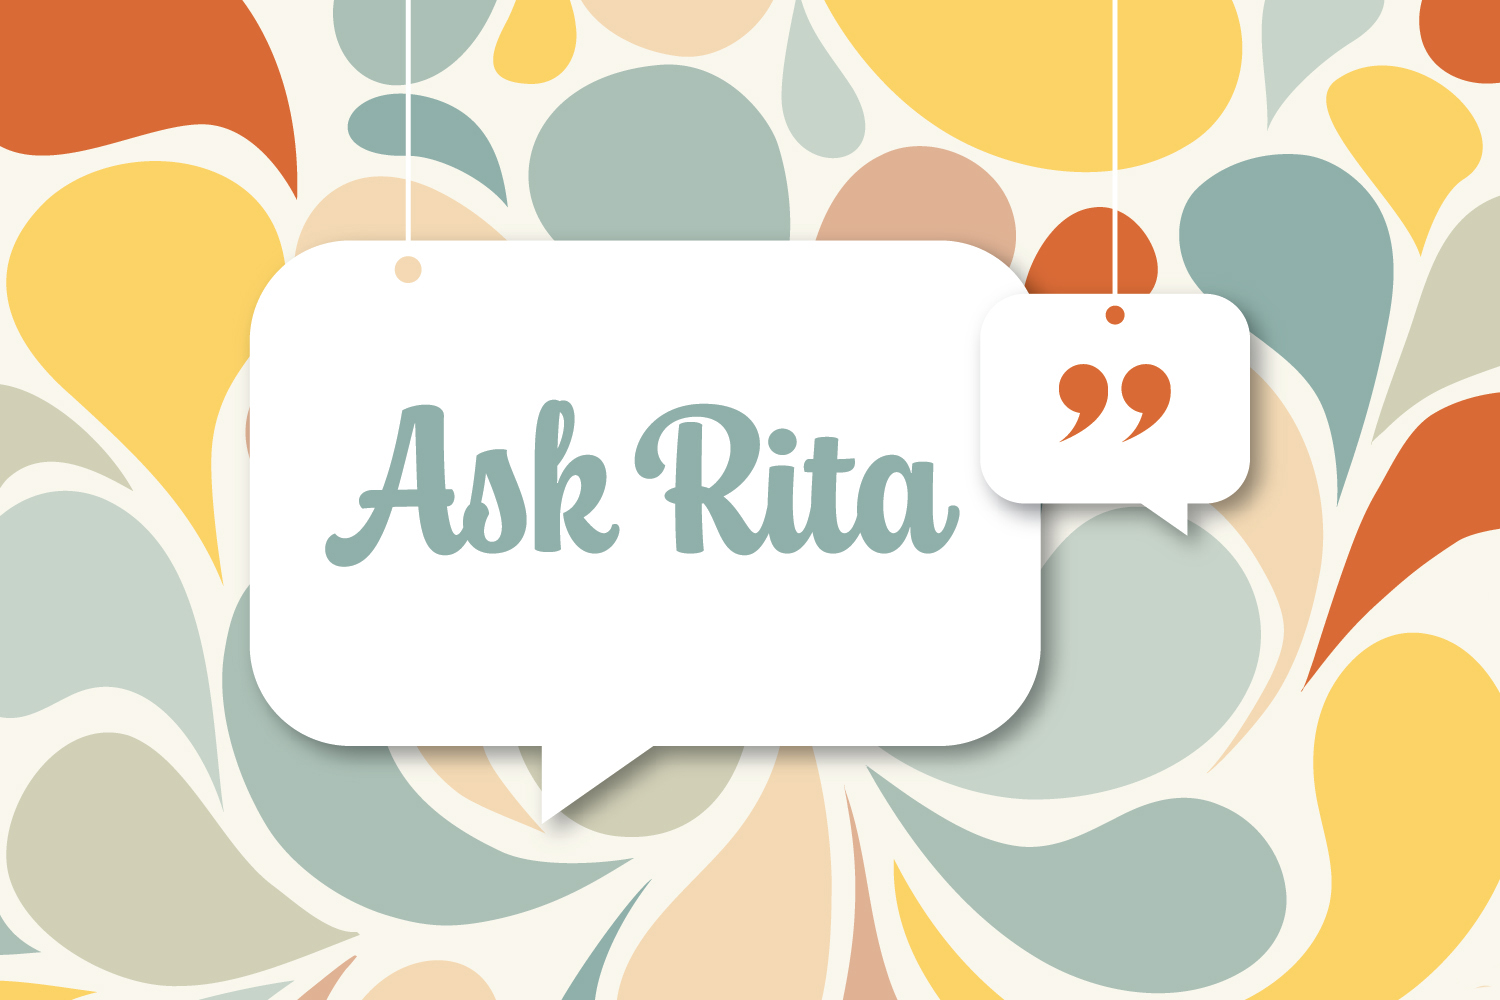 Ask Rita: Employees Who Cross Jurisdictions: Which Law Applies?